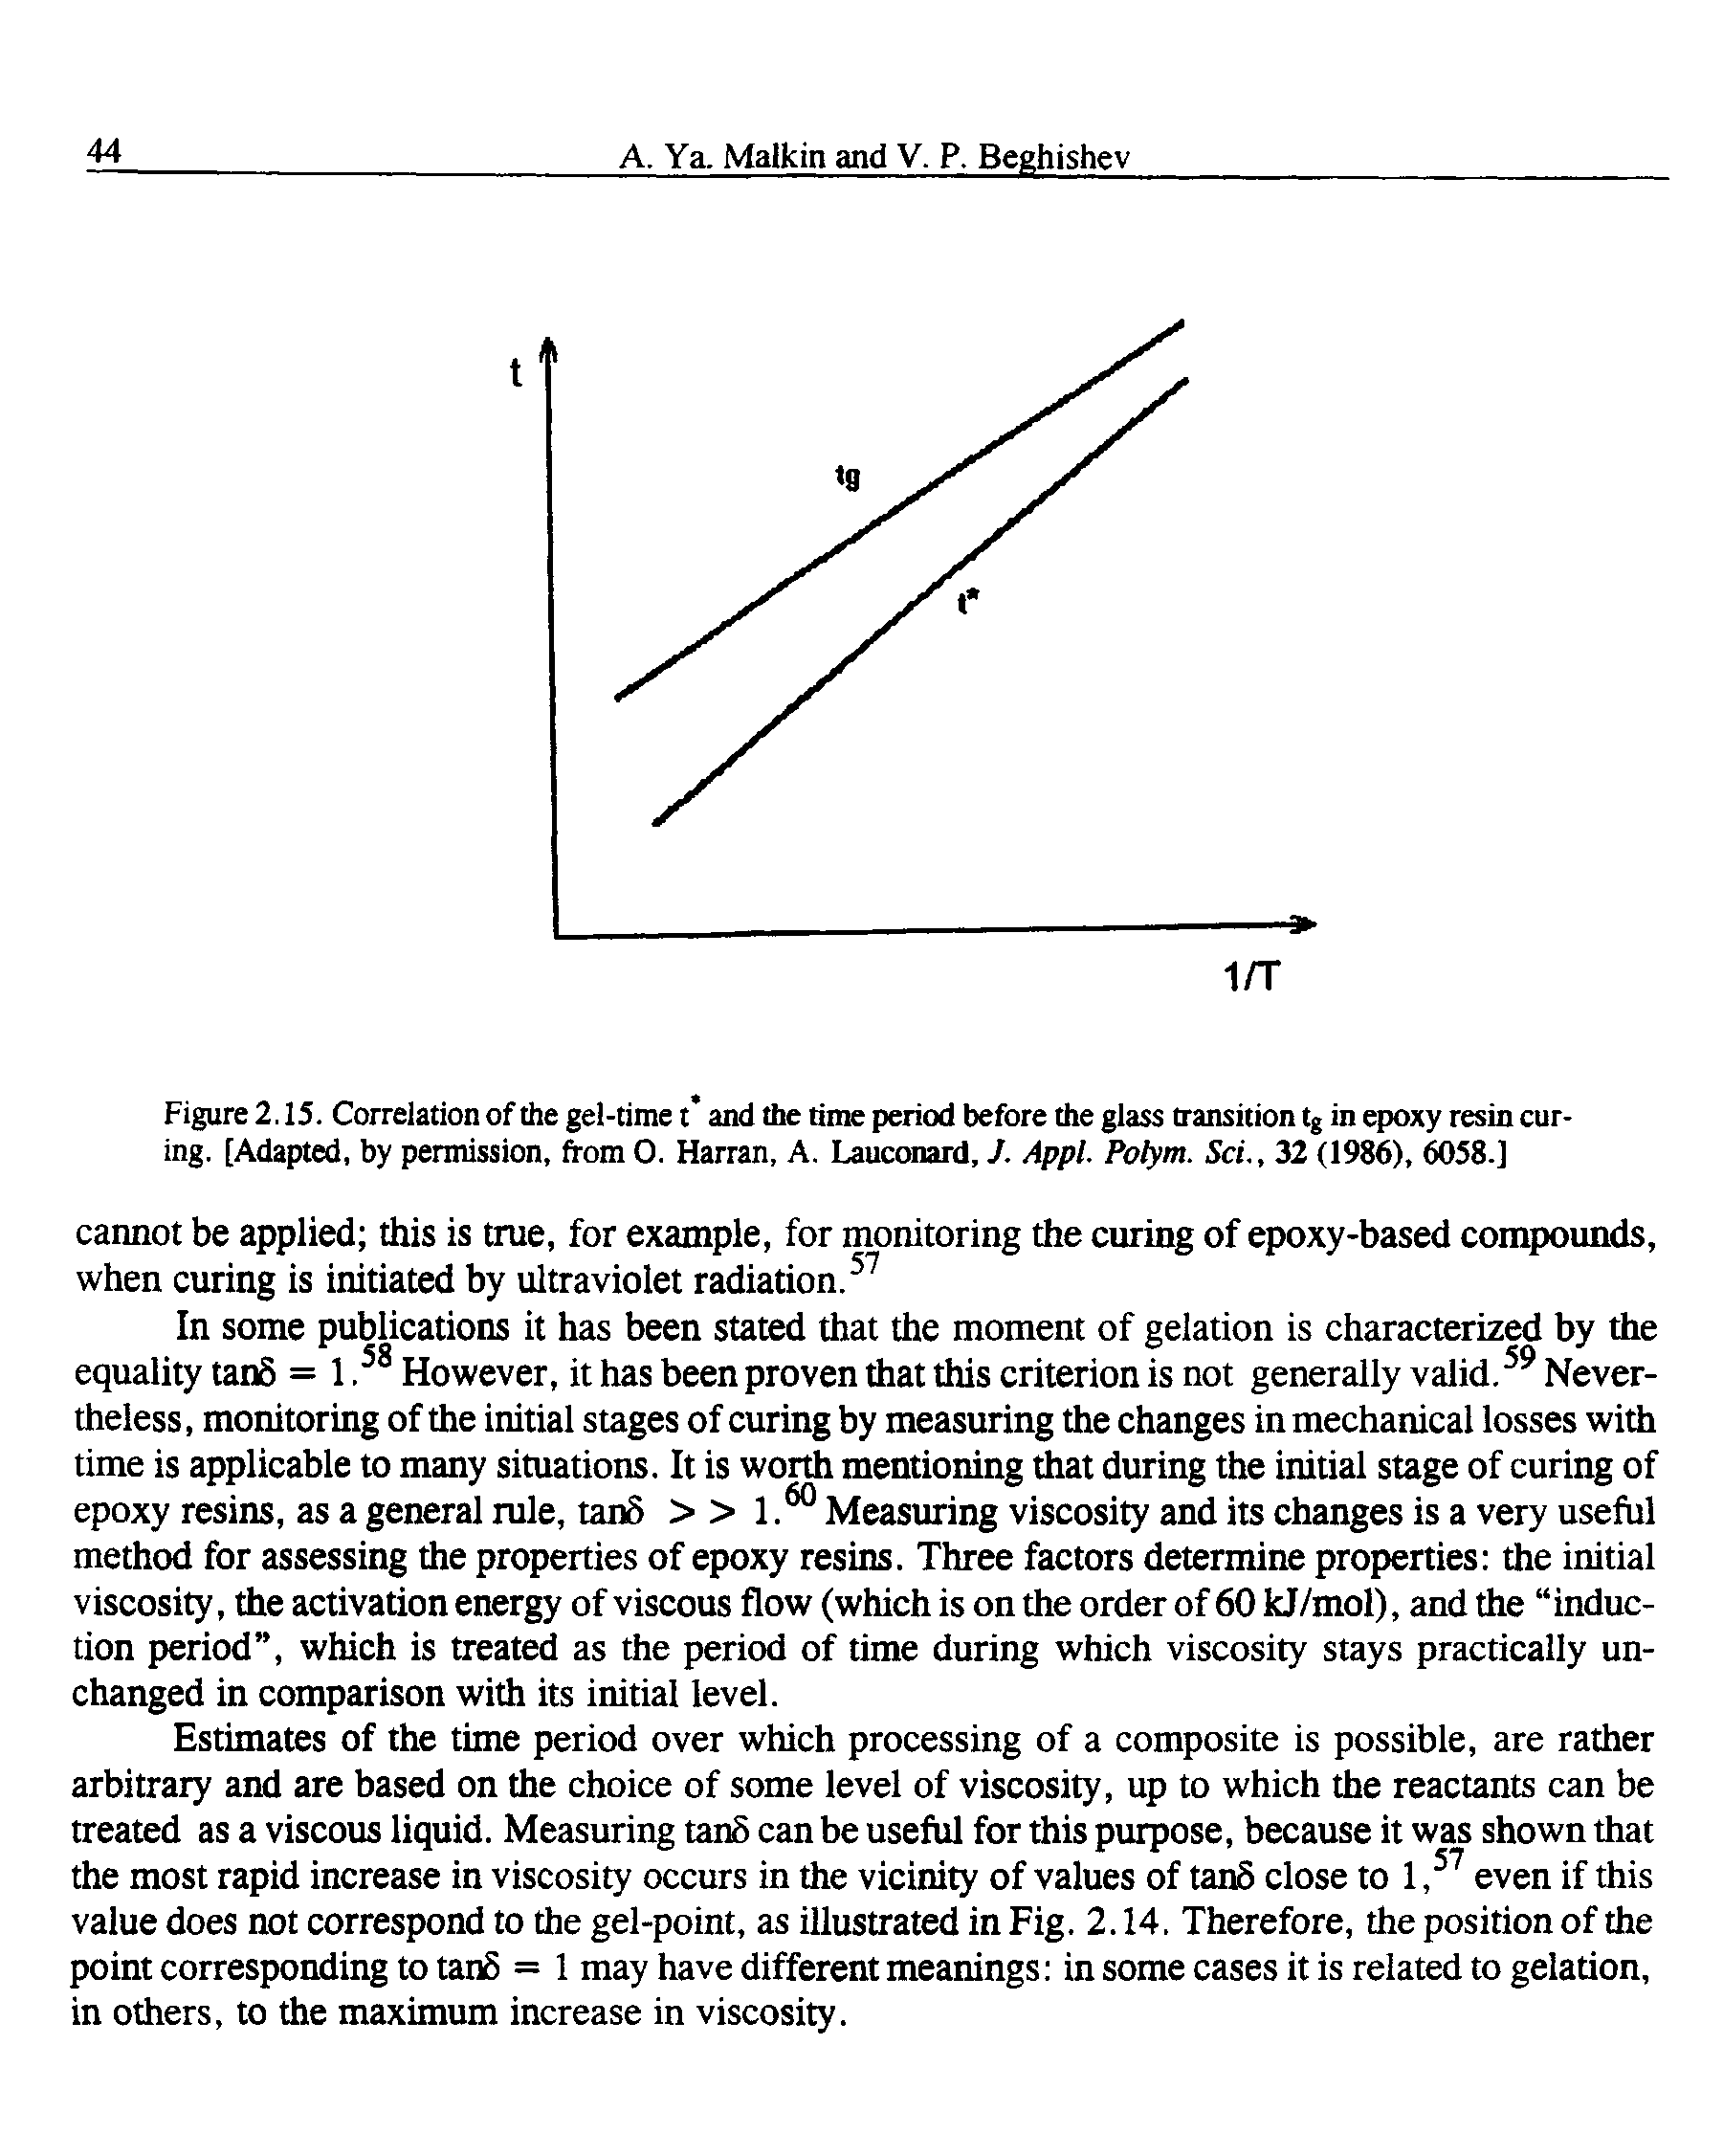 Figure 2.15. Correlation of the gel-time t and the time period before the glass transition tg in epoxy resin curing. [Adapted, by permission, from 0. Harran, A. Lauconard, J. Appl. Polym. Sci., 32 (1986), 6058.]...